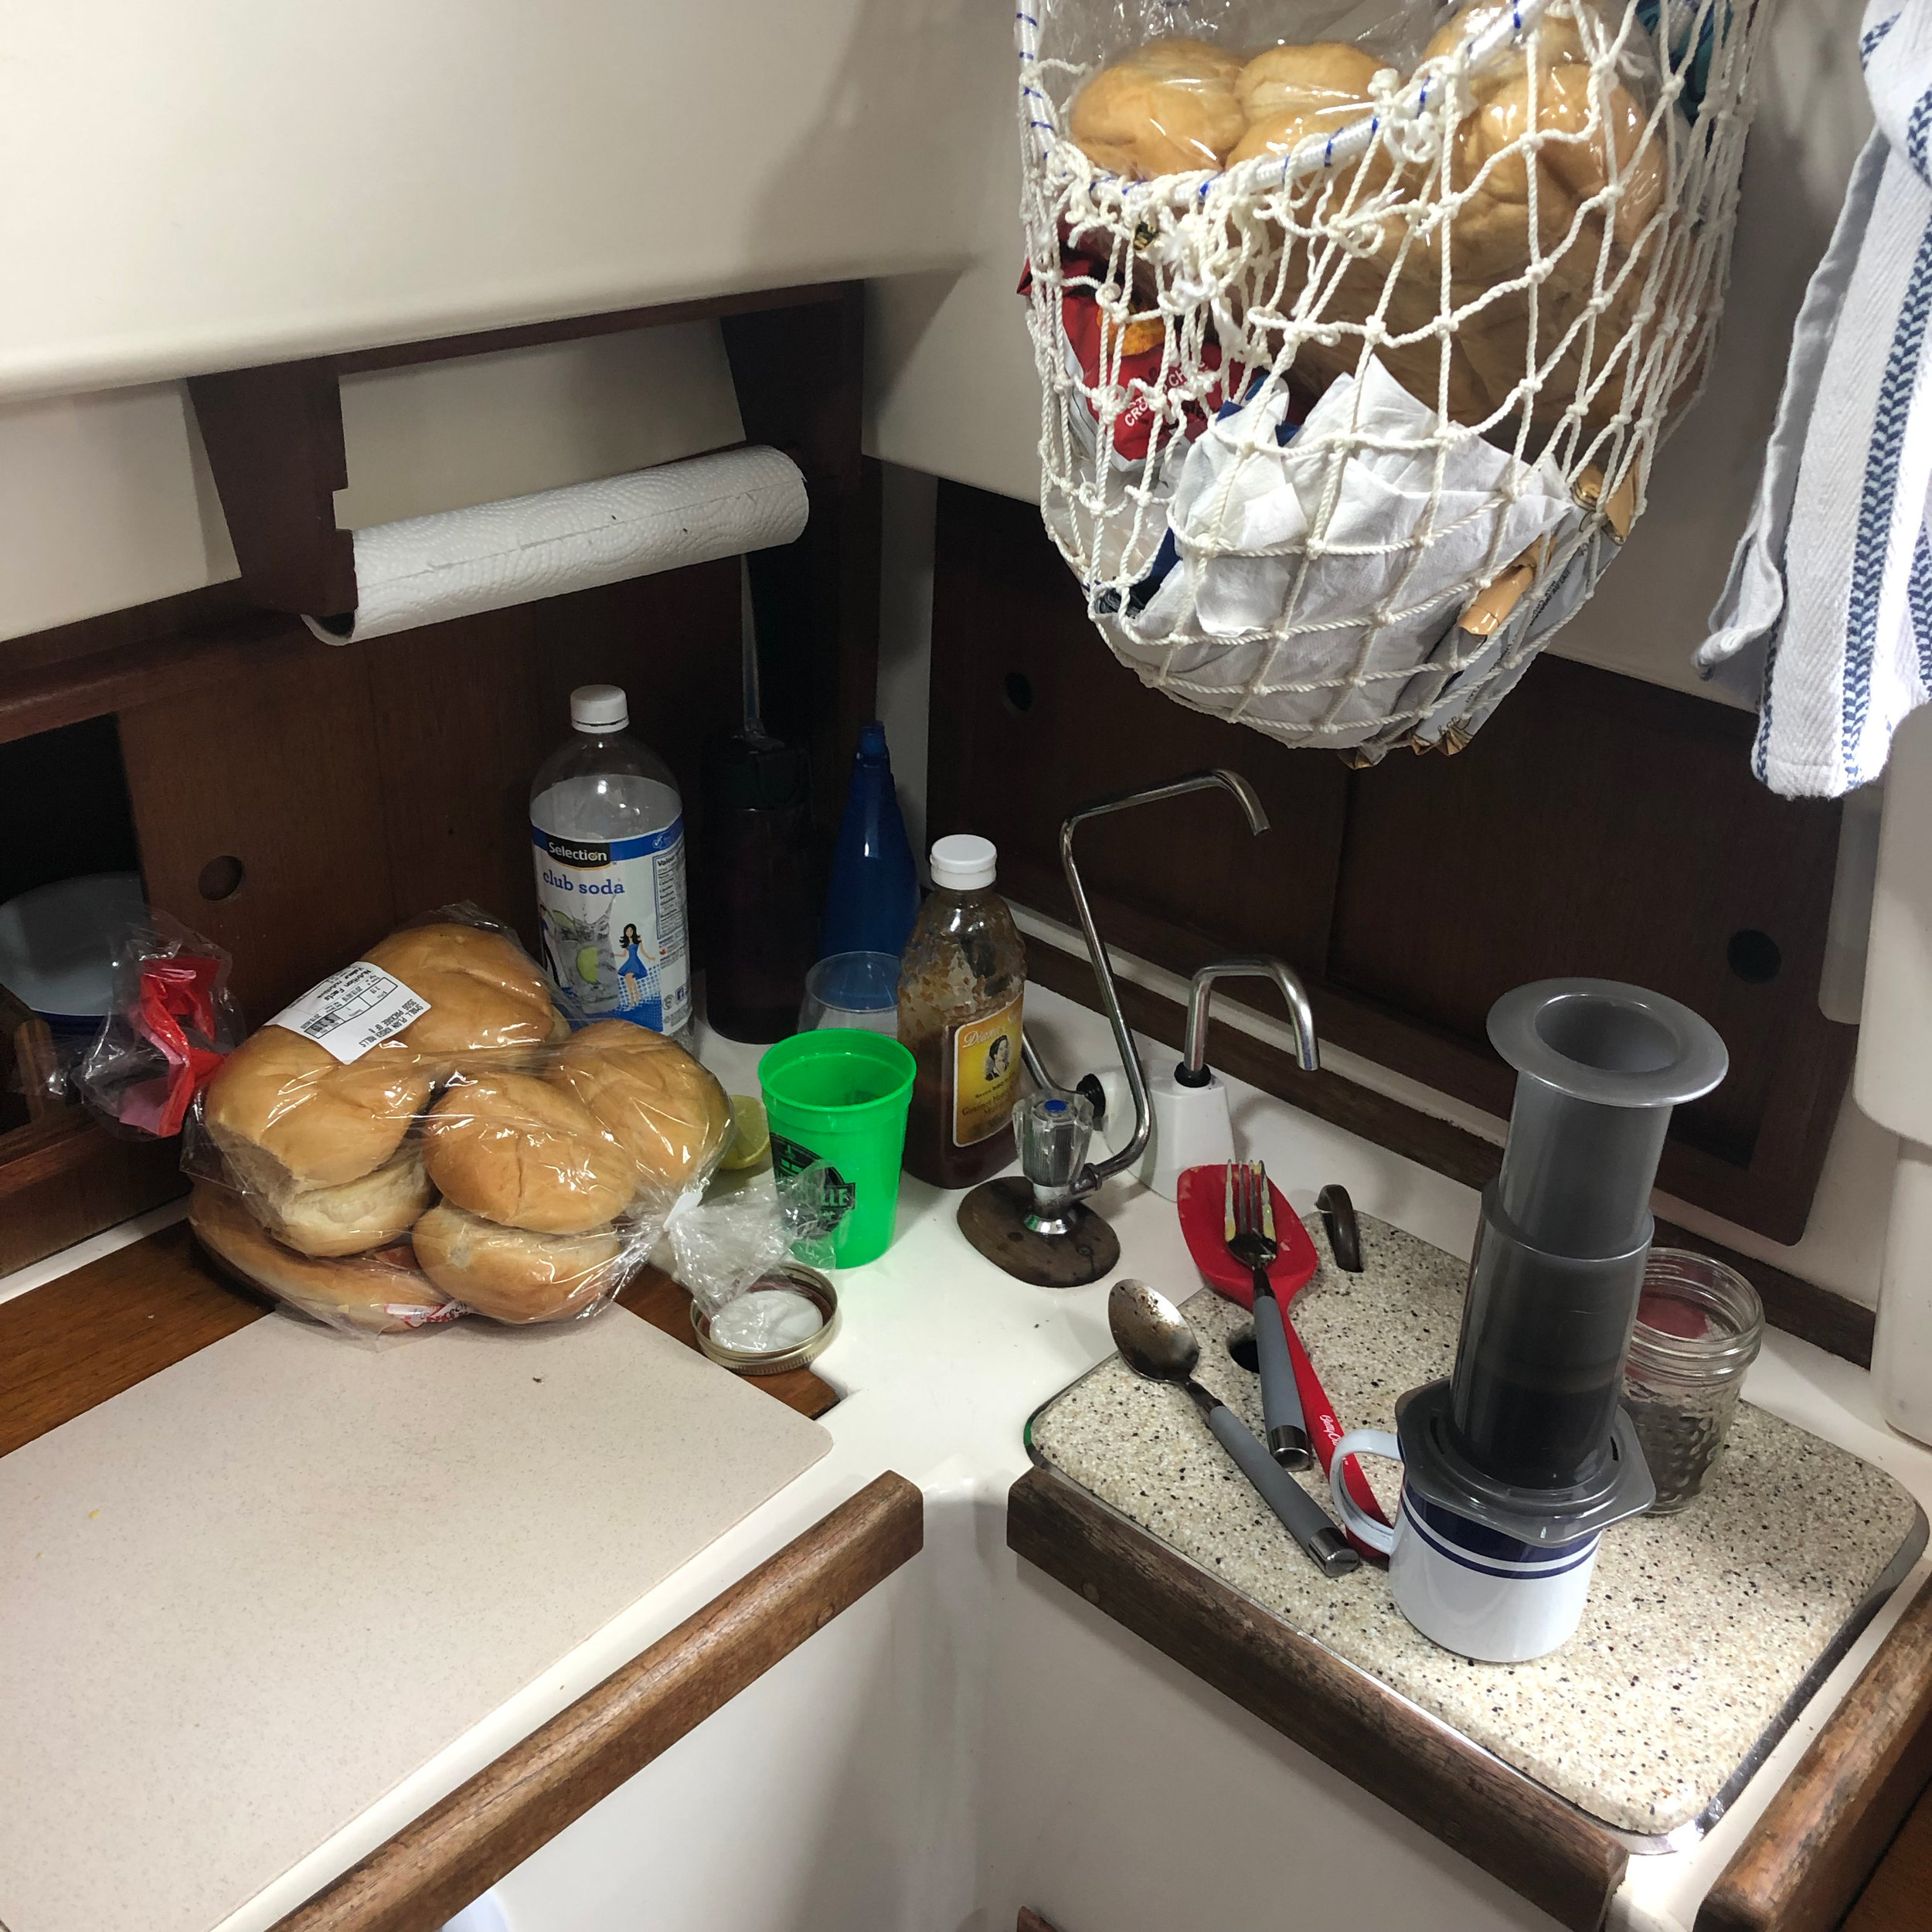 GALLEY IN USE